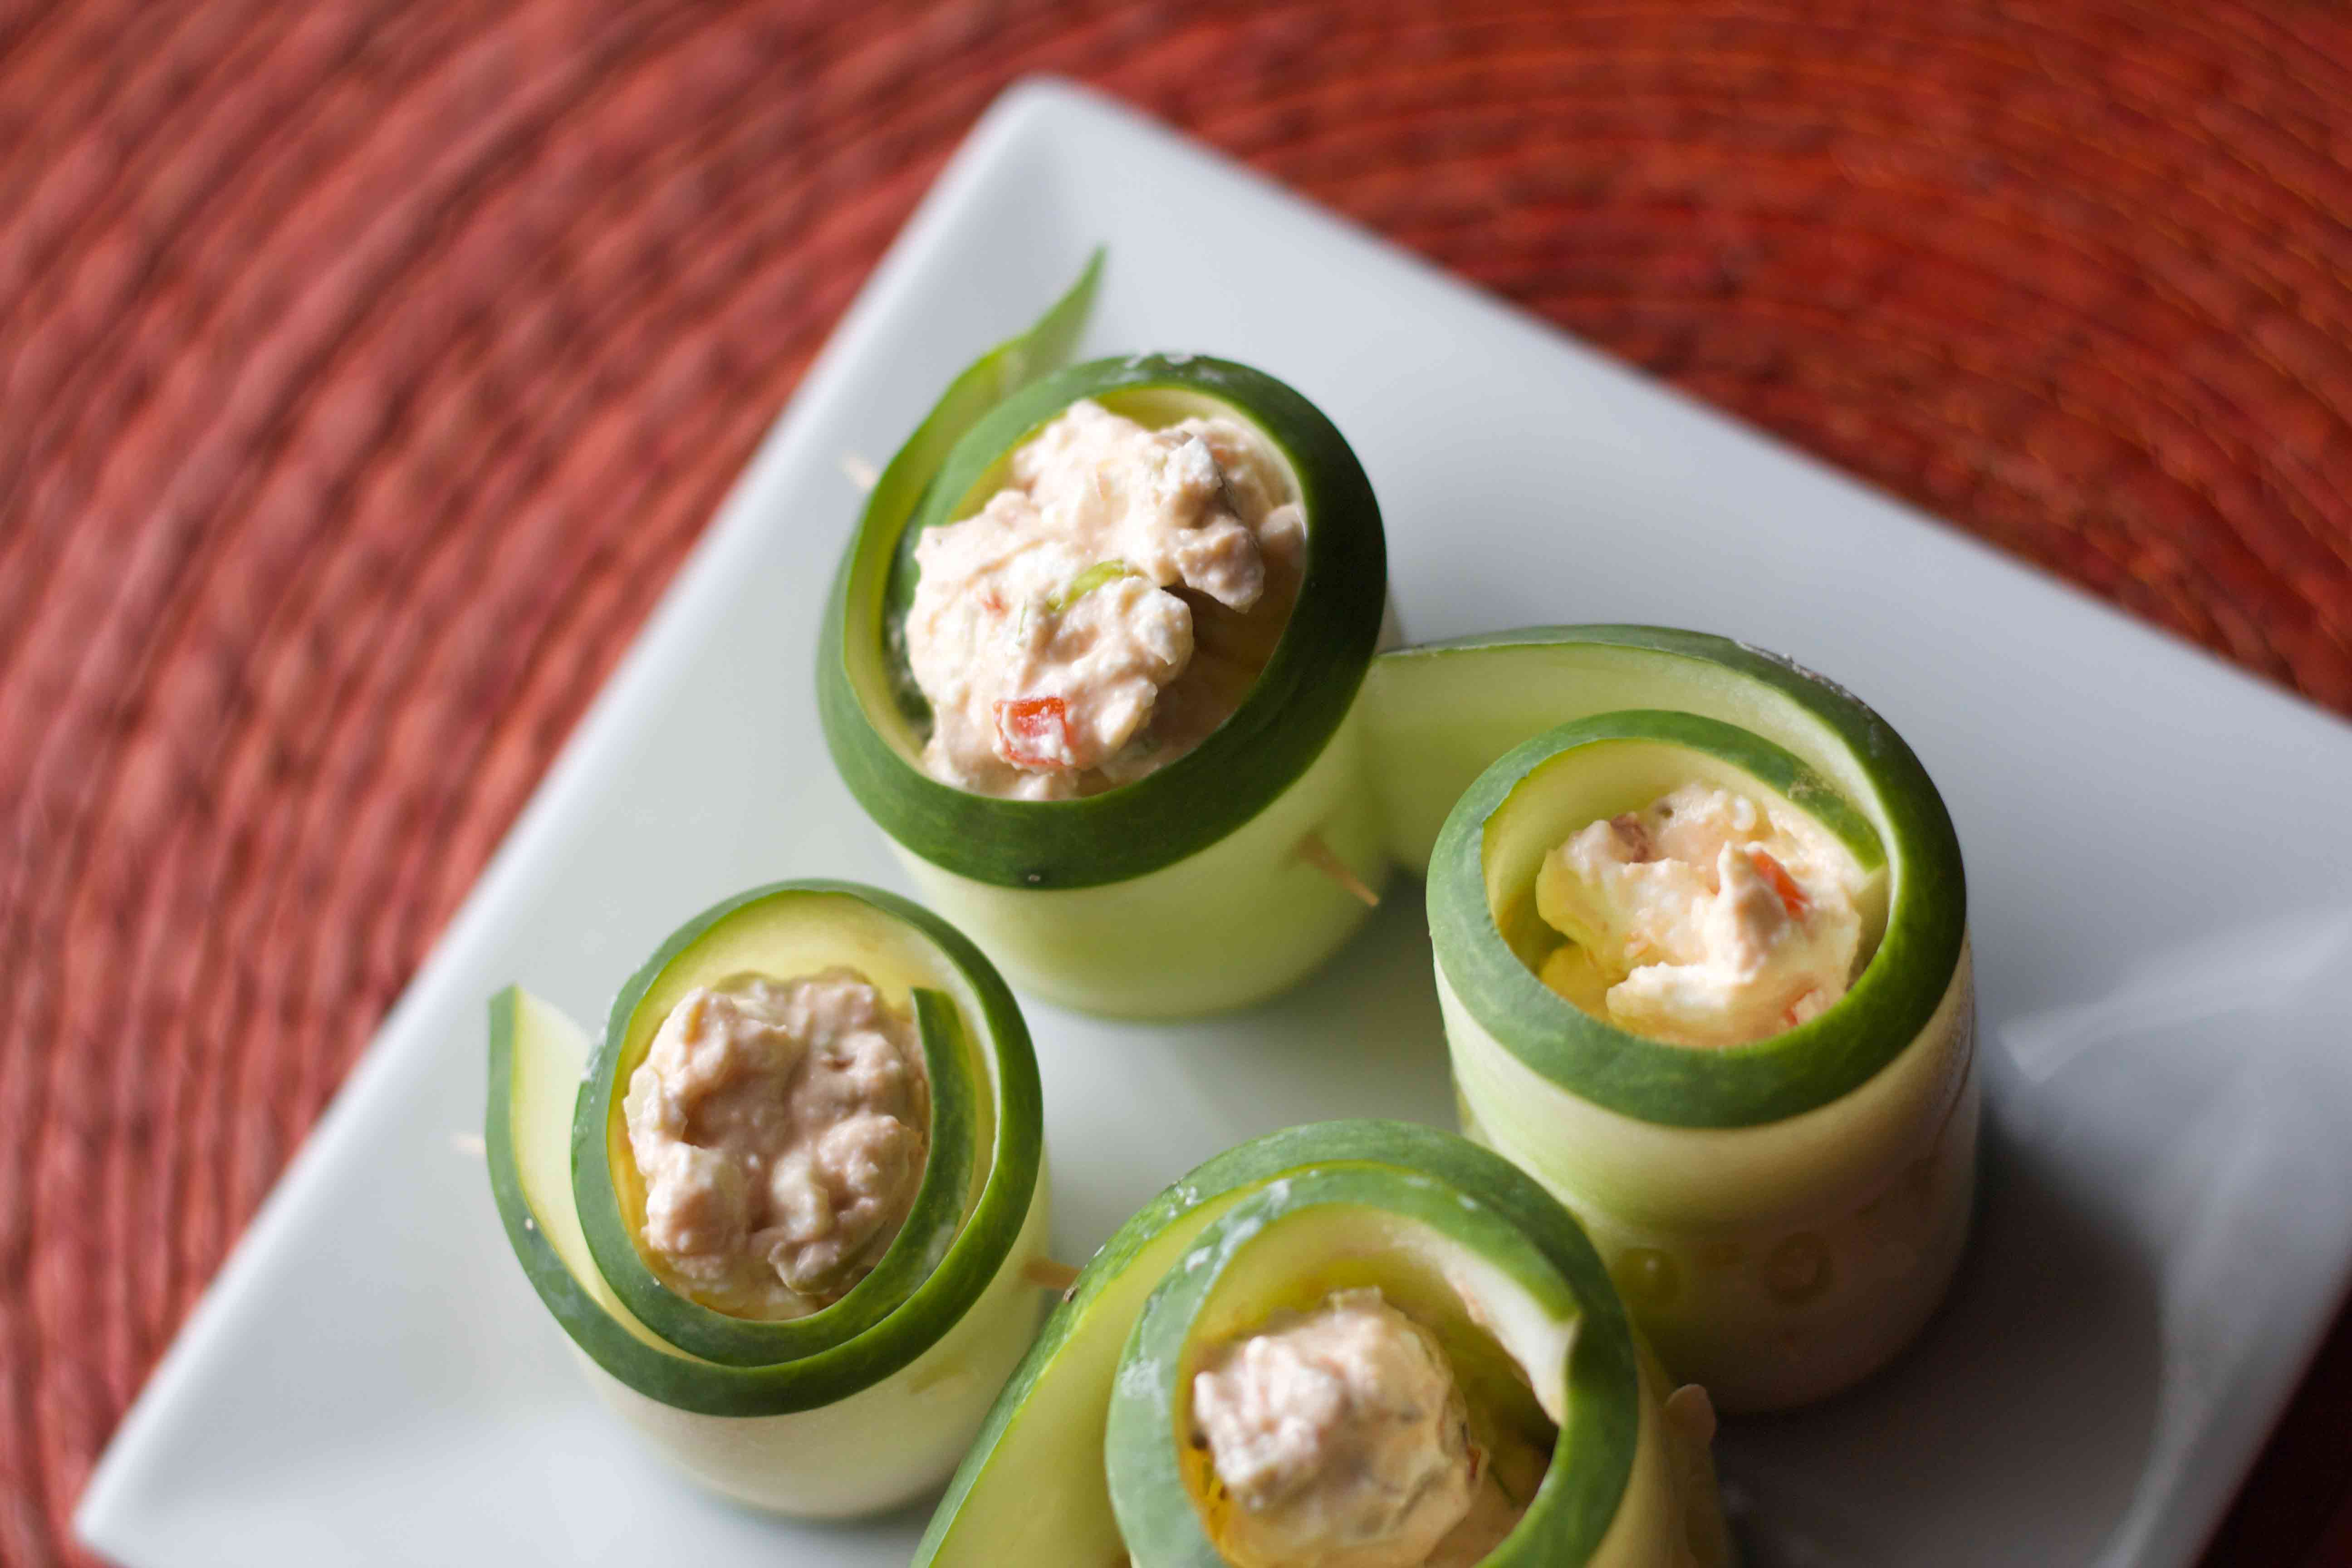 Cucumber Feta Rolls. Low carb snacks great for weight loss surgery patients.